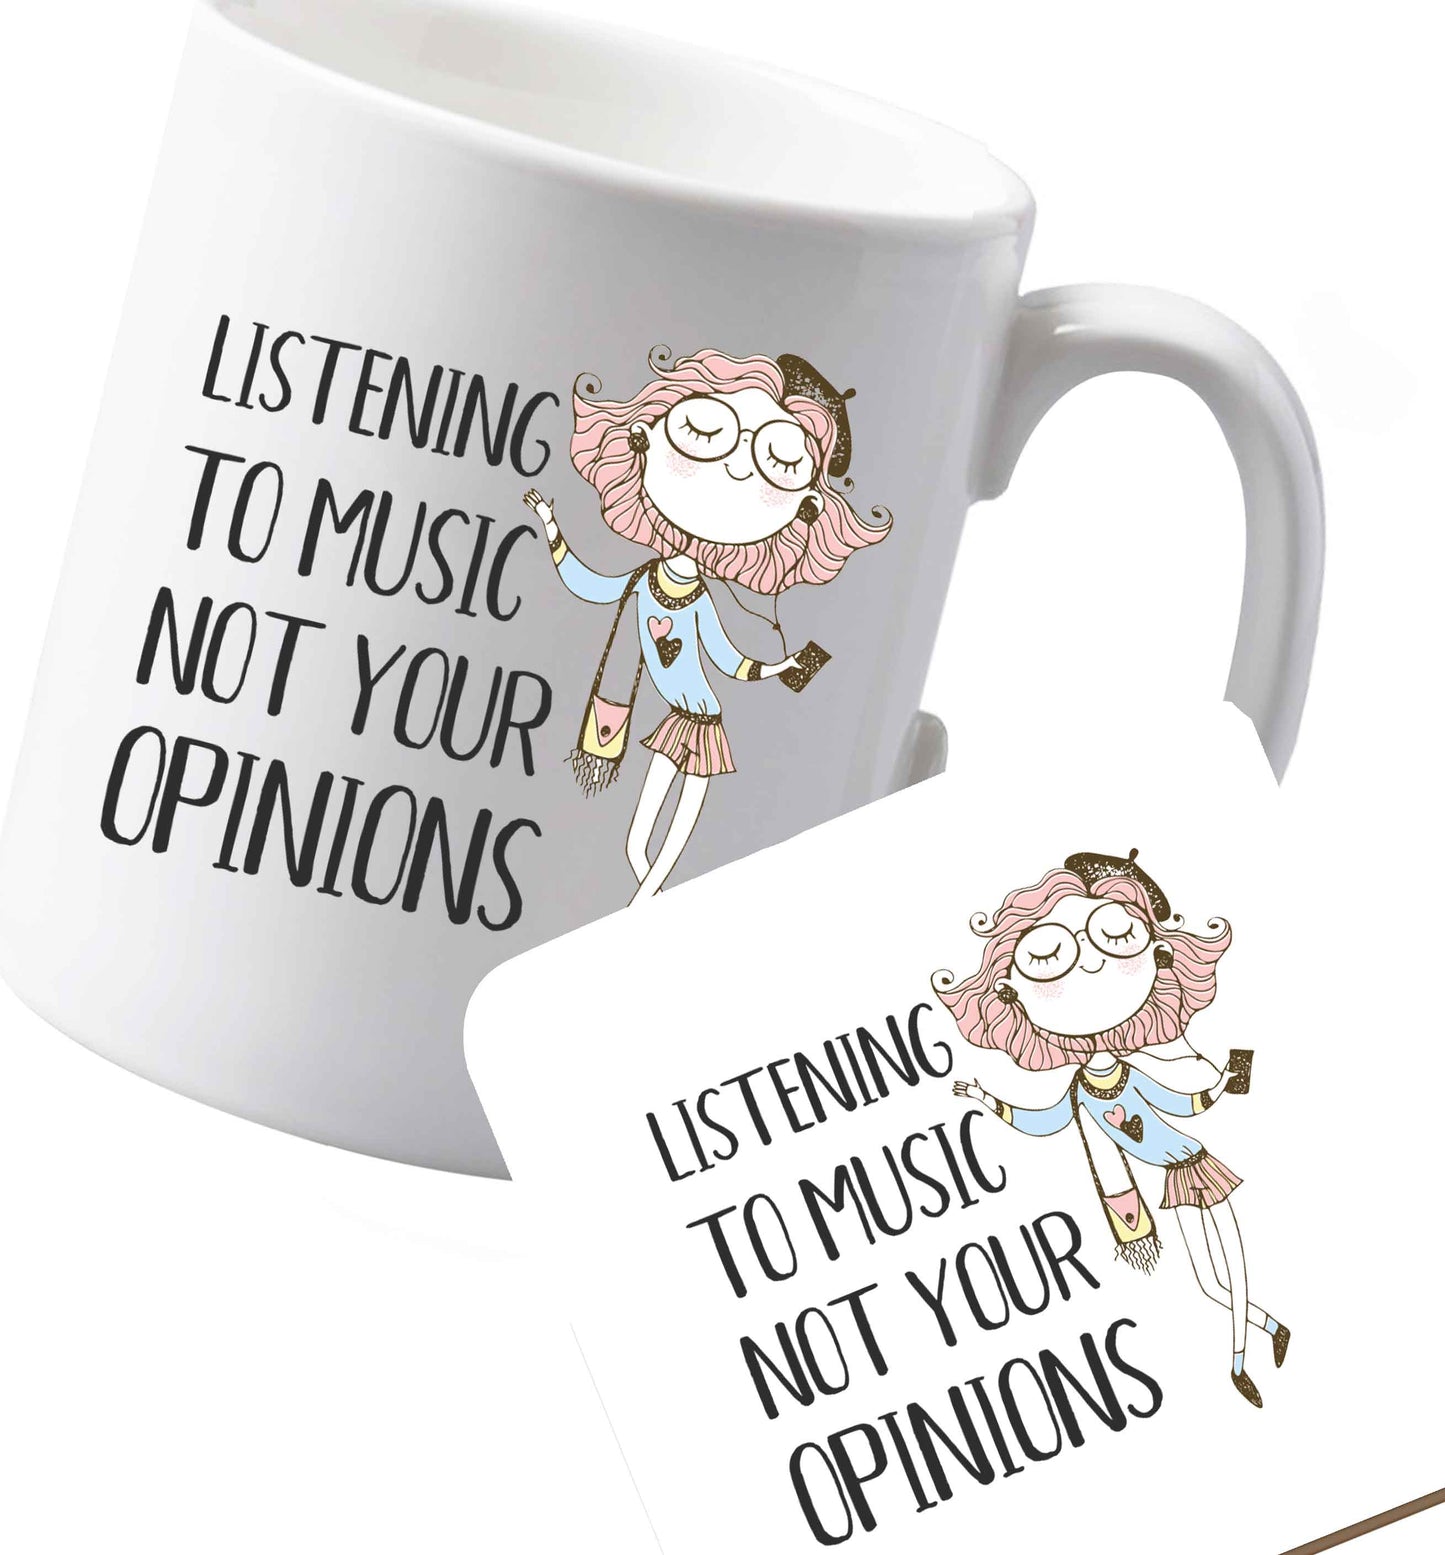 10 oz Ceramic mug and coaster Listening to music not your opinions illustration   both sides